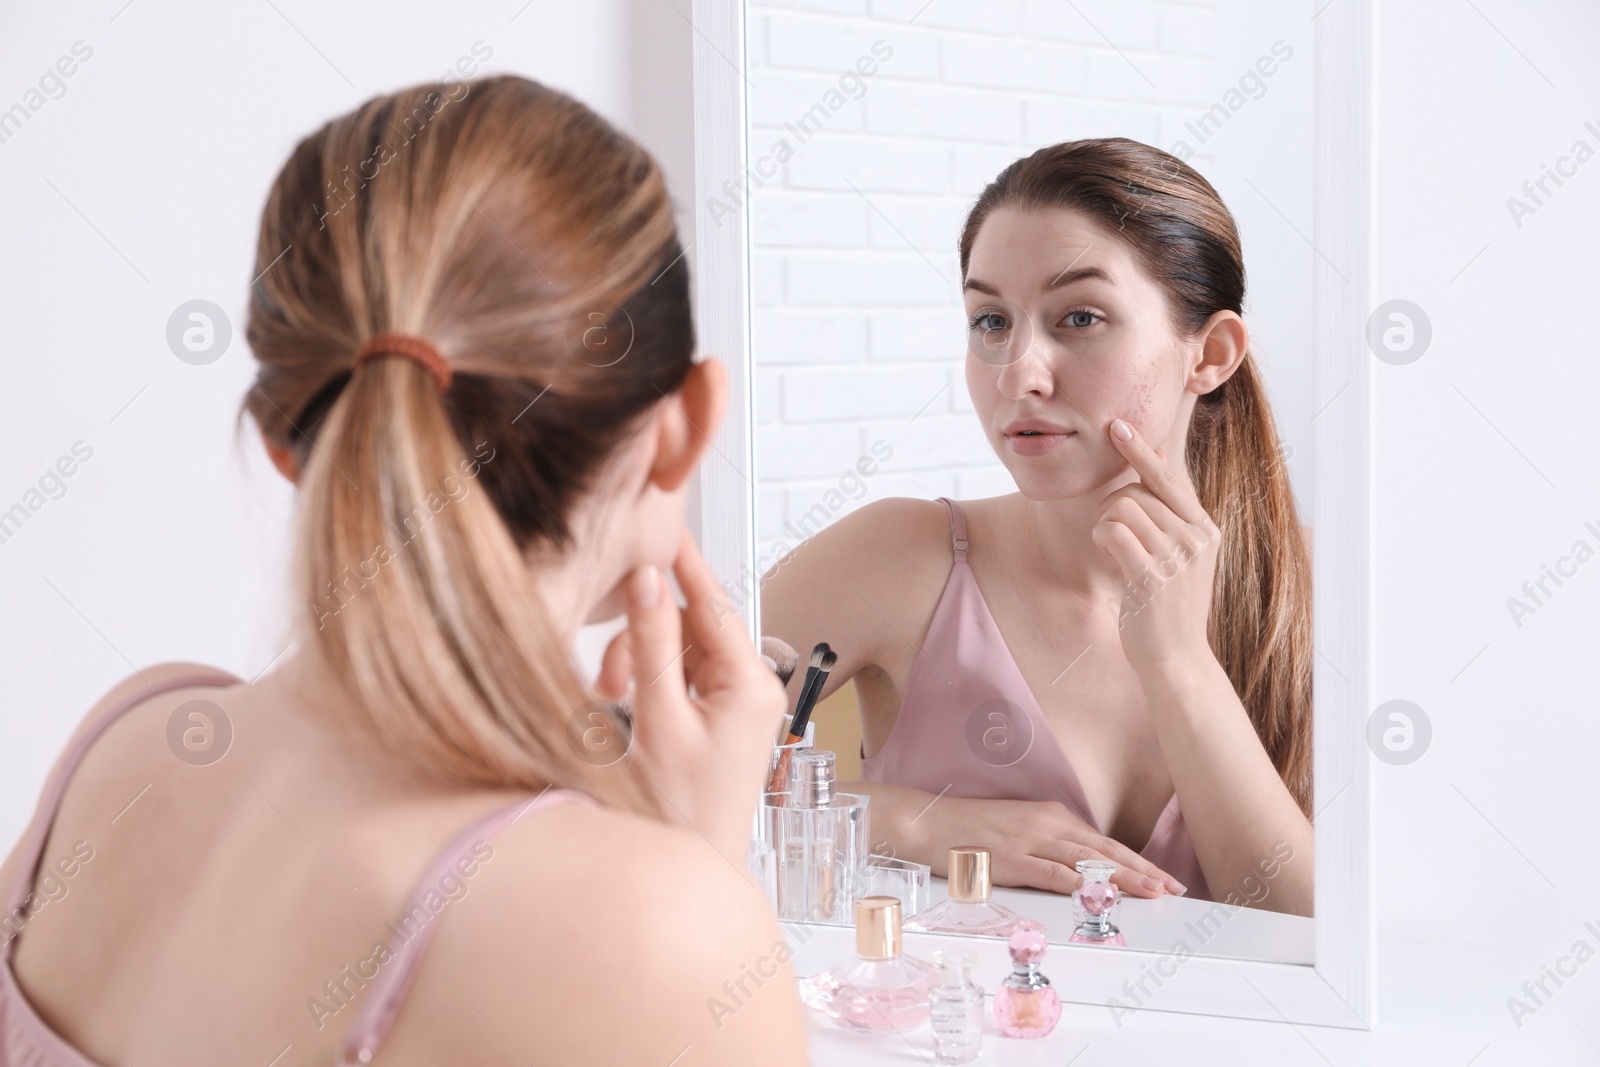 Photo of Woman with acne problem near mirror indoors